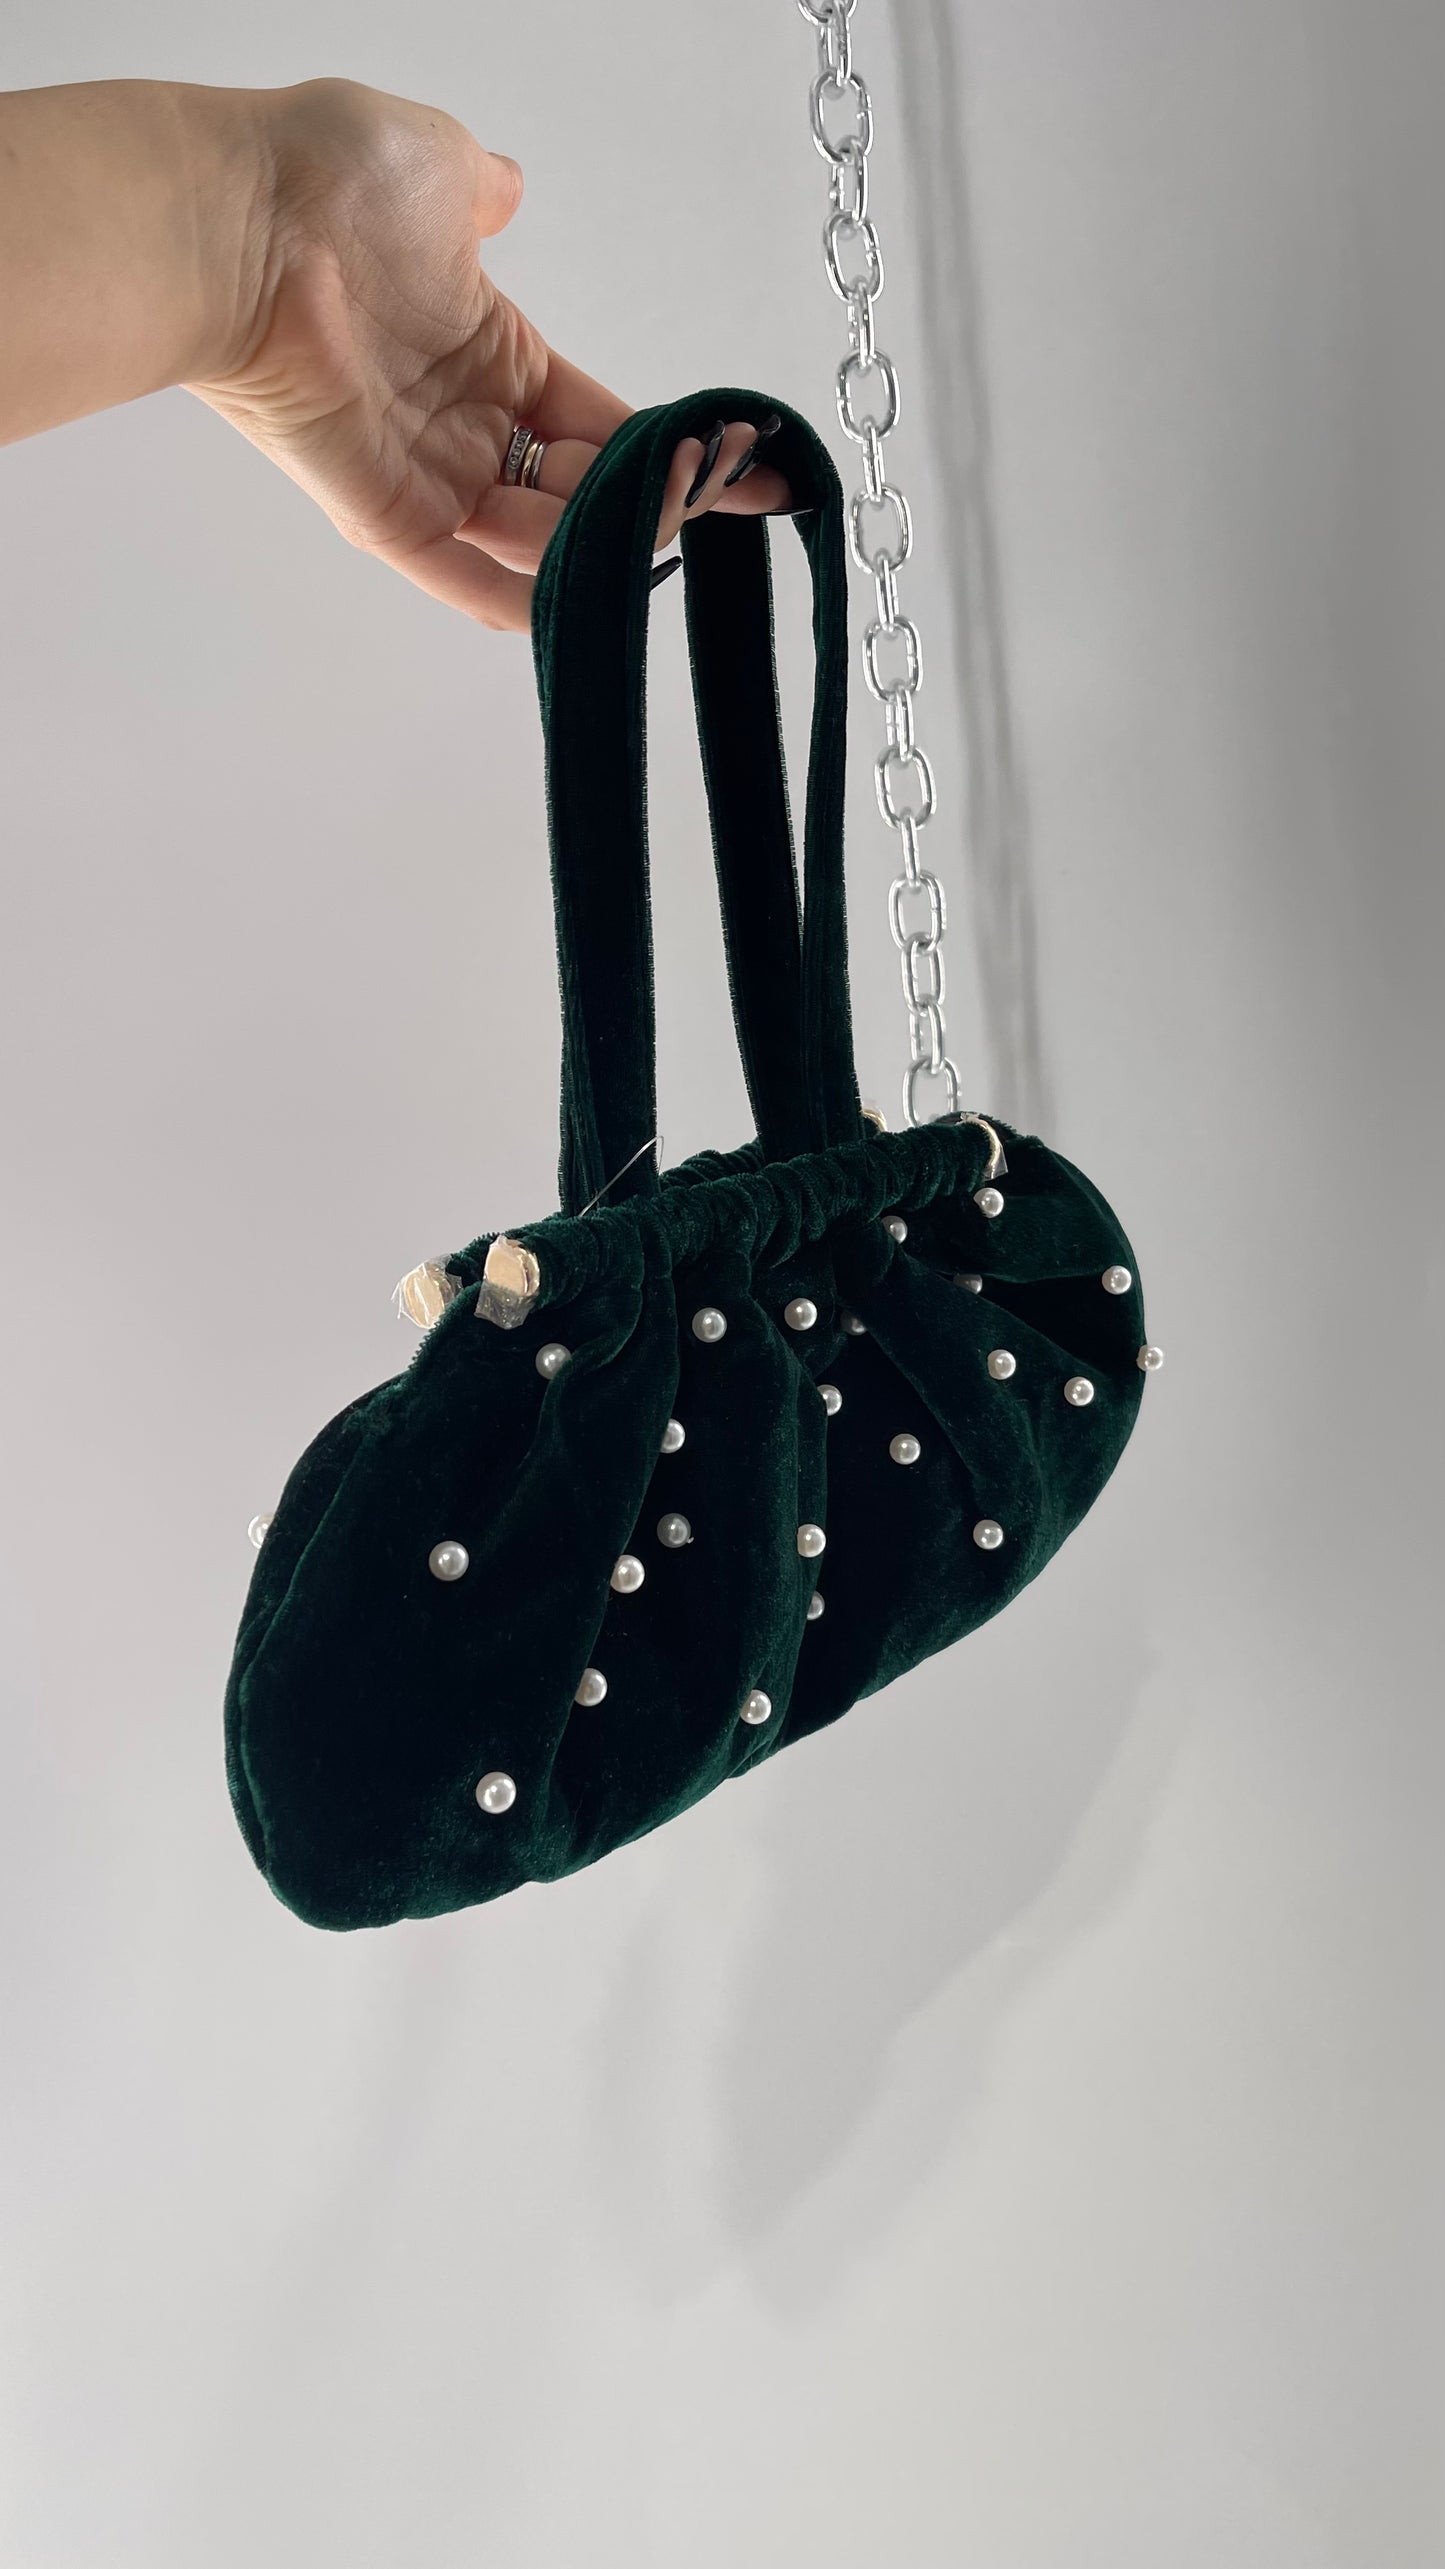 Vintage Deep Green Velvet Purse Covered in Pearls, and Featuring Gold Metal Closure Still Lined in Protective Plastic